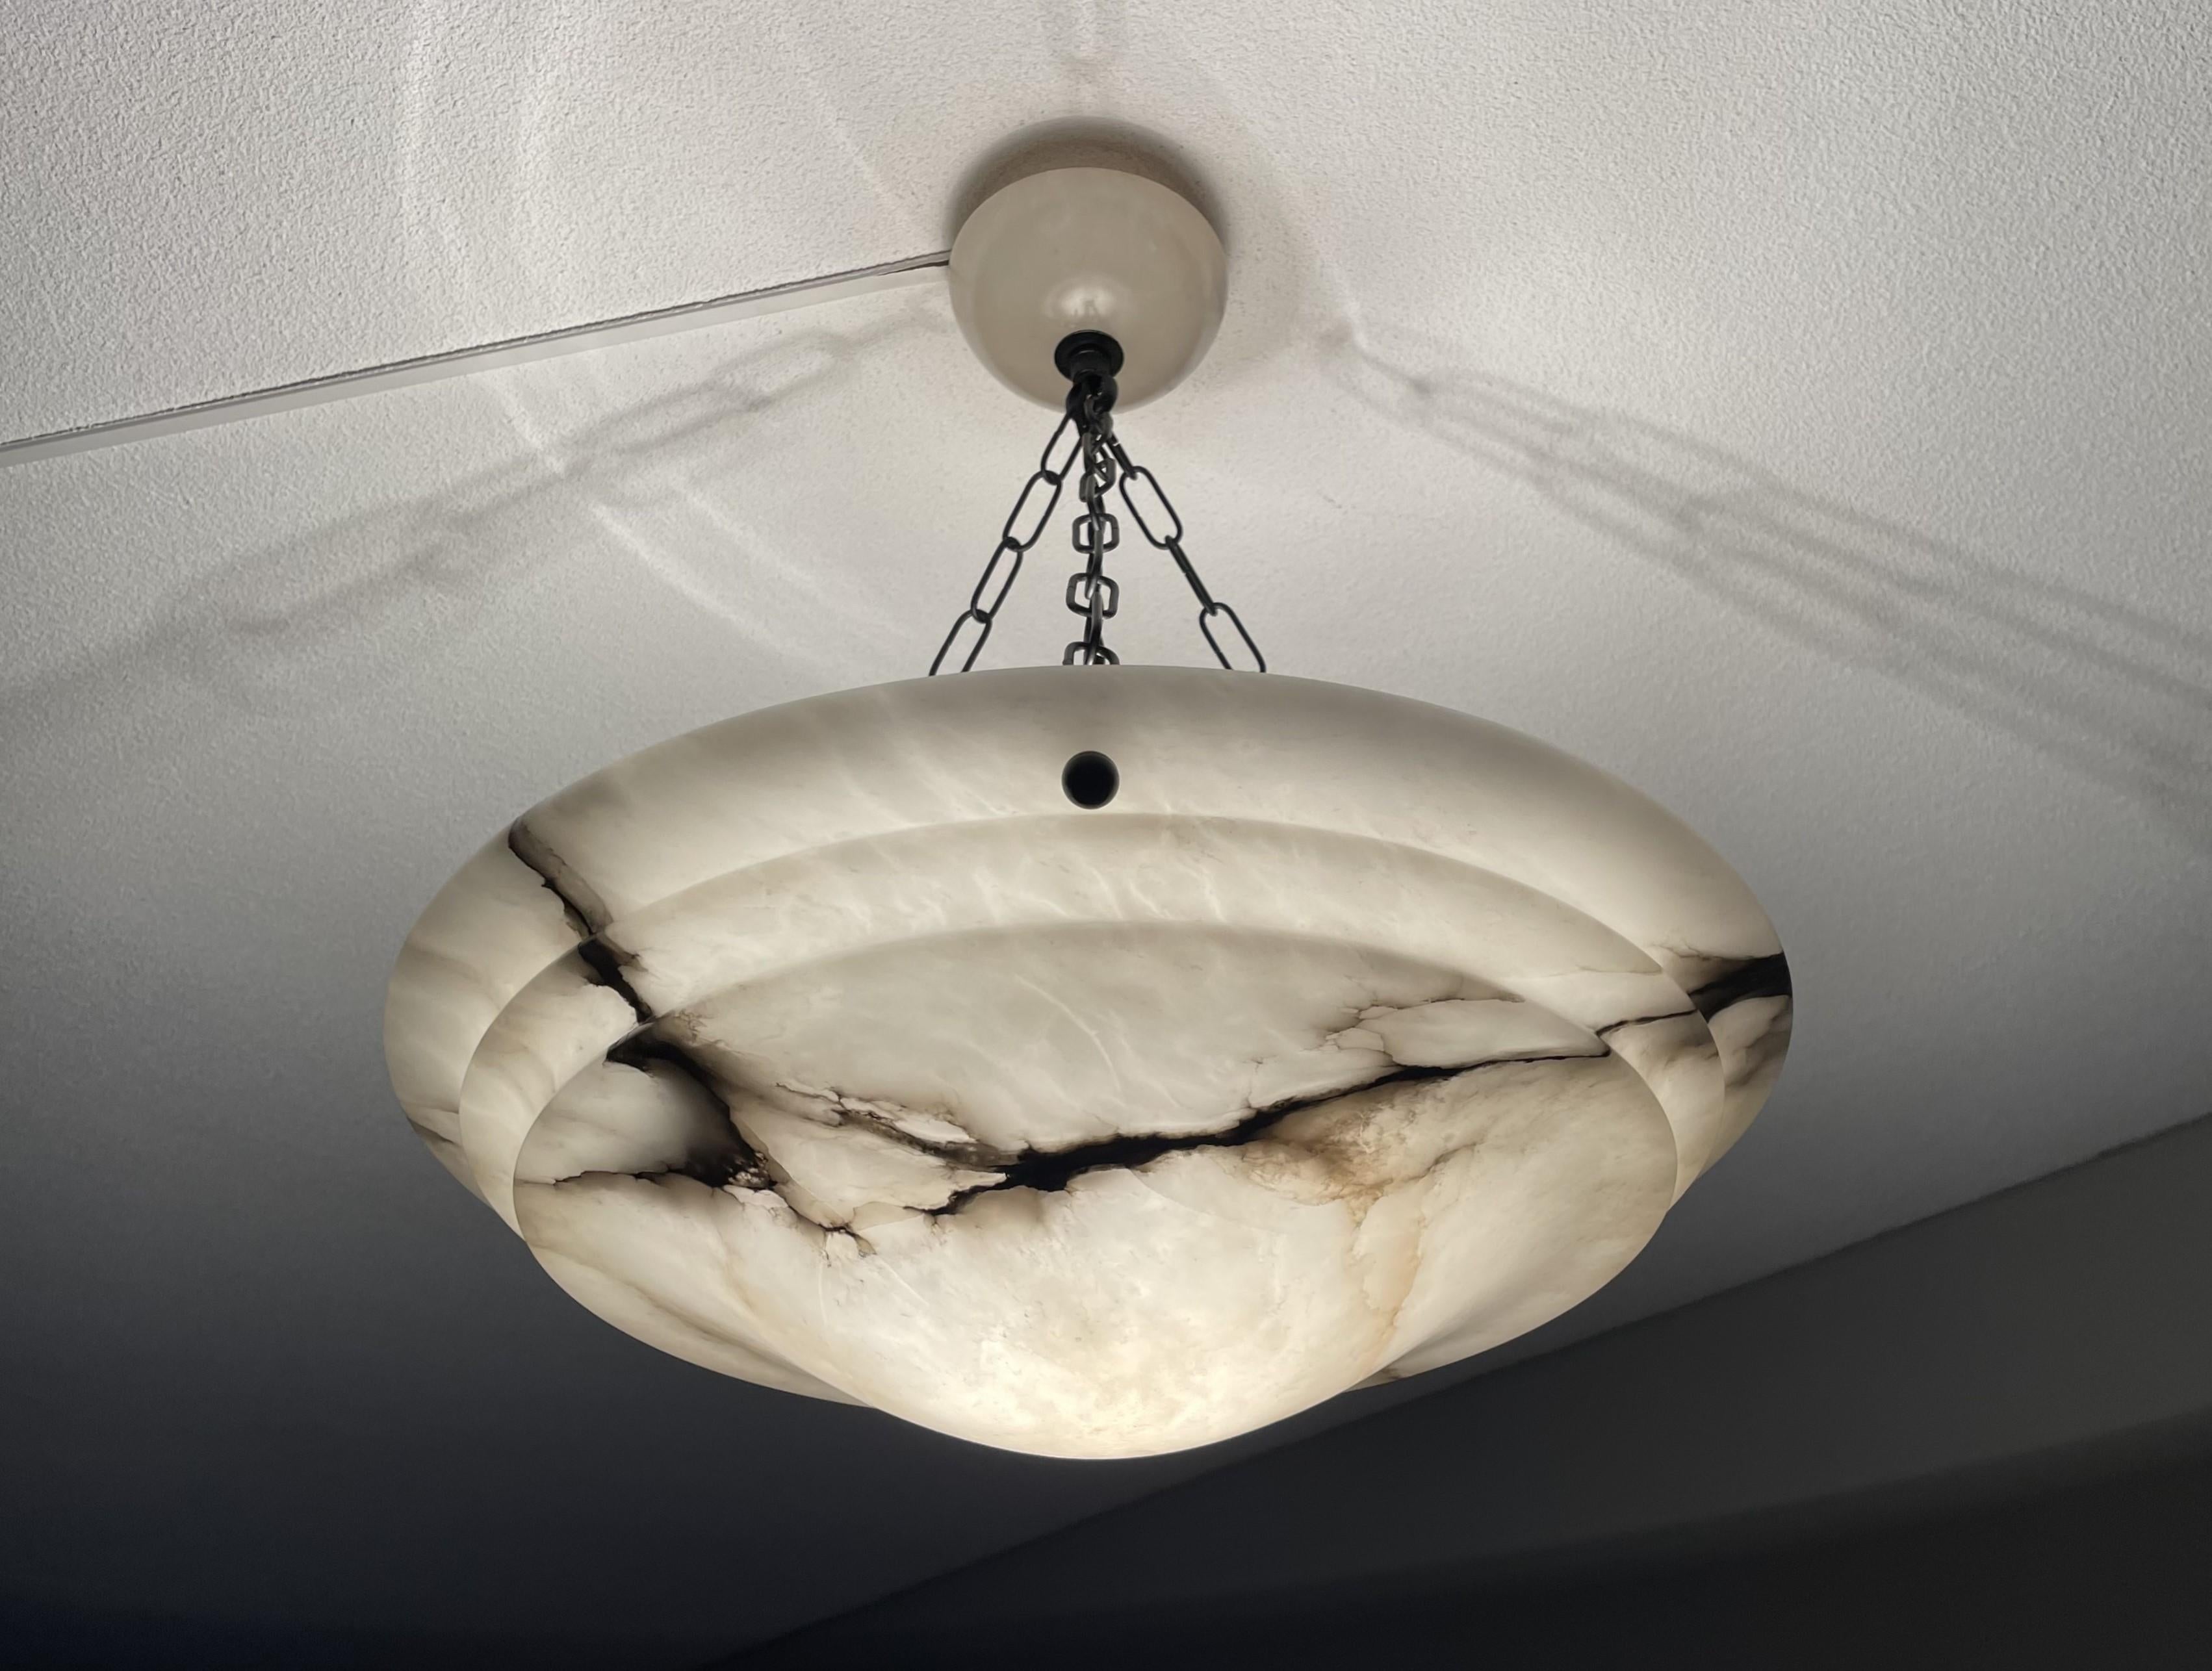 Stunning and large size, alabaster pendant of great design and top quality workmanship.

This rare fixture from the heydays of the European Art Deco era could soon be lighting up your days and evenings. Its remarkable, circular and layered shade